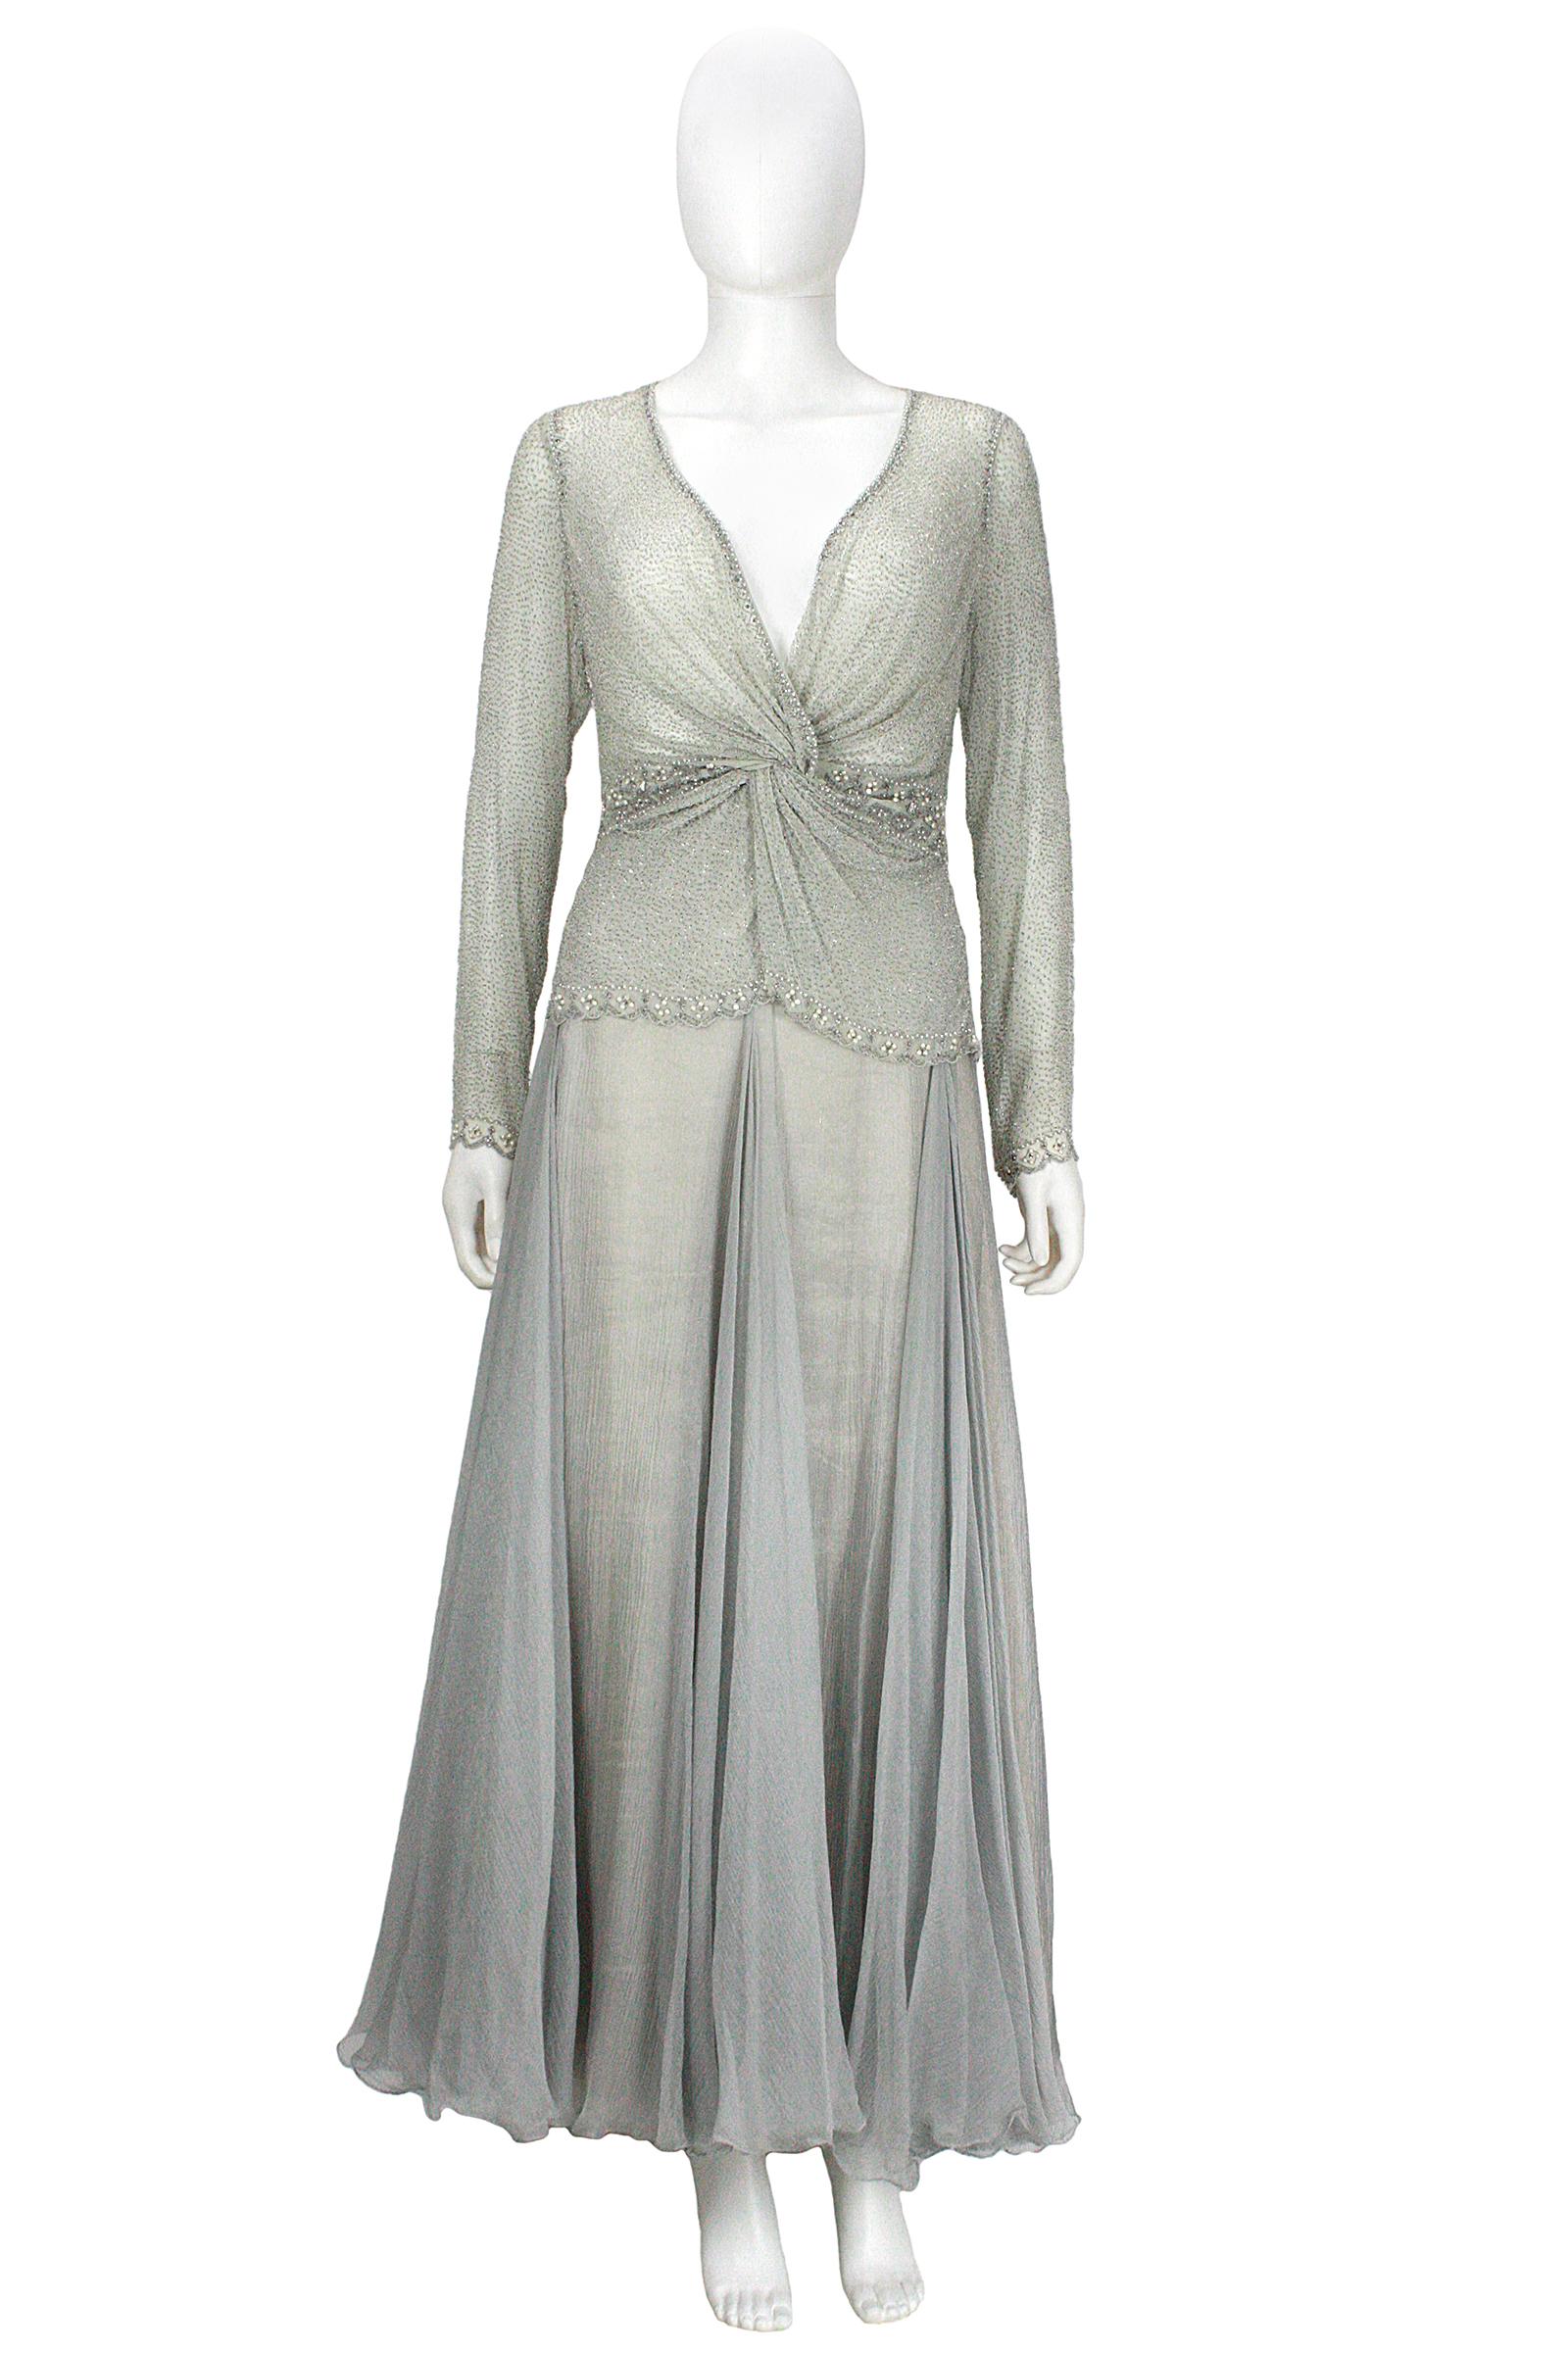 Eavis & Brown beaded top and long skirt 
Sea-foam chiffon with hand beading 
V-neck with a twist design 
Side zipper closure 
Crinkle metallic silver chiffon skirt
Champagne metallic chiffon under-layer with light grey lining 
Back zipper and hook